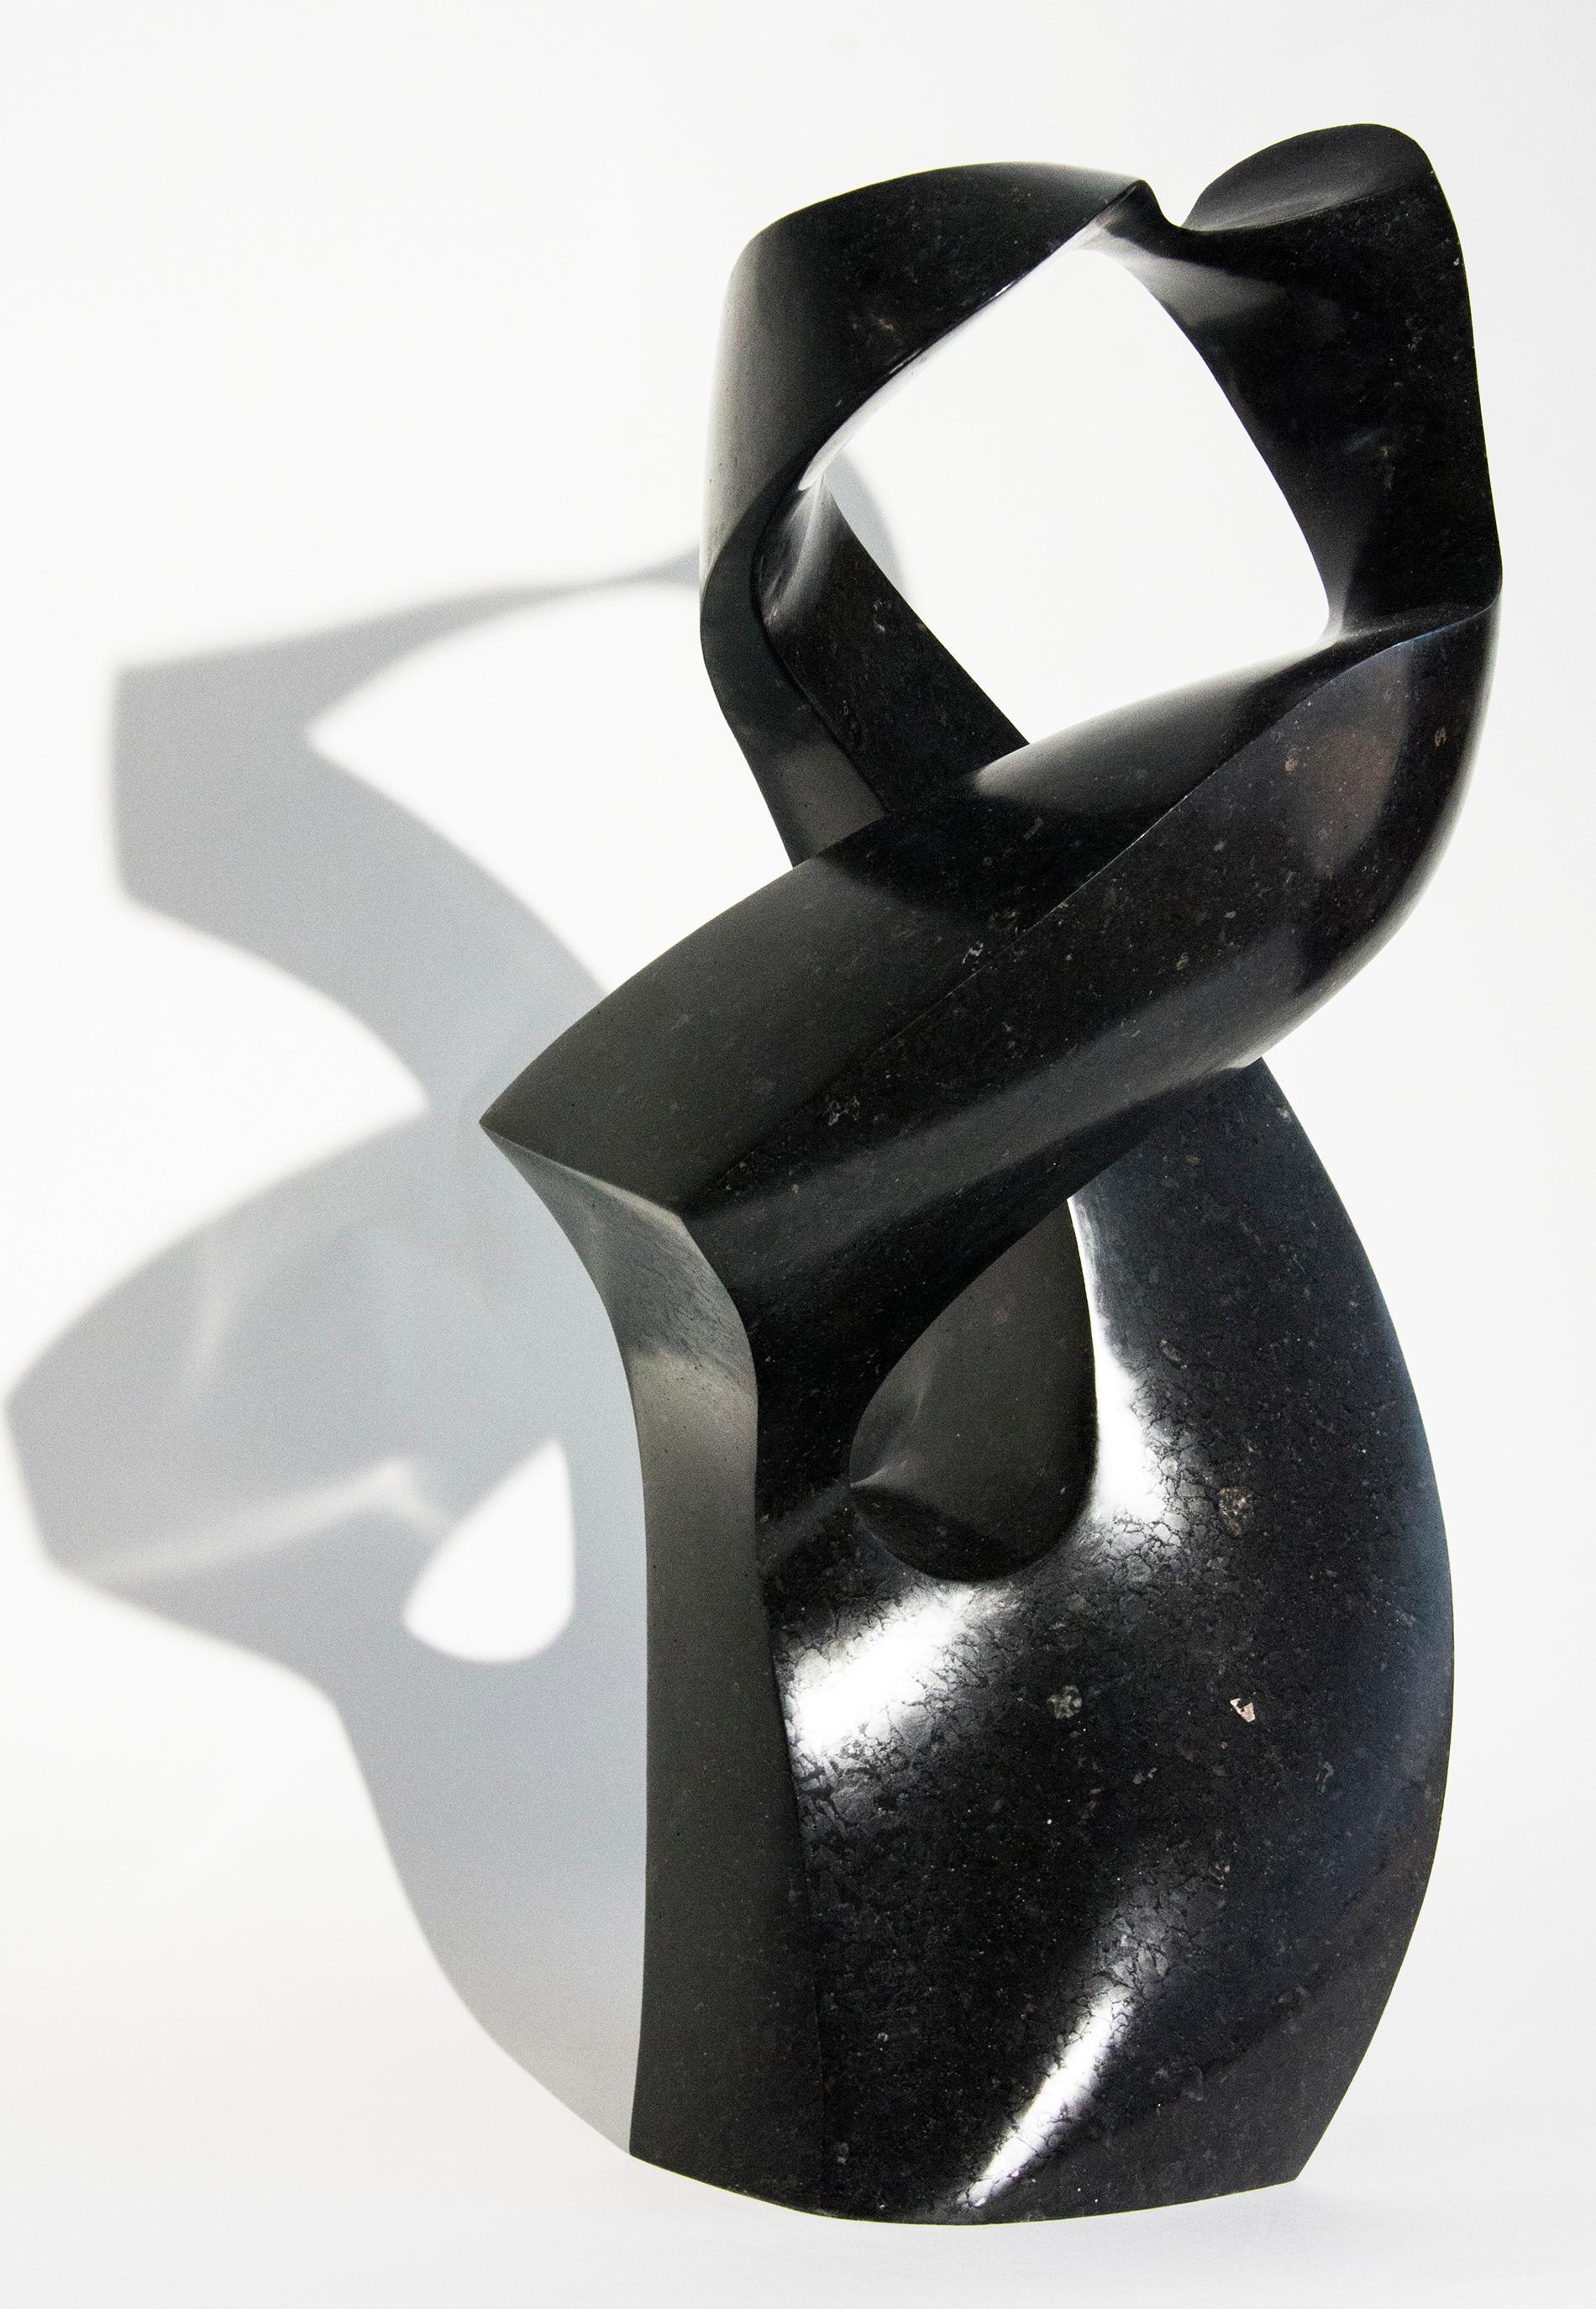 Embrace 4/50 - dark, smooth, polished, abstract, black granite sculpture For Sale 1